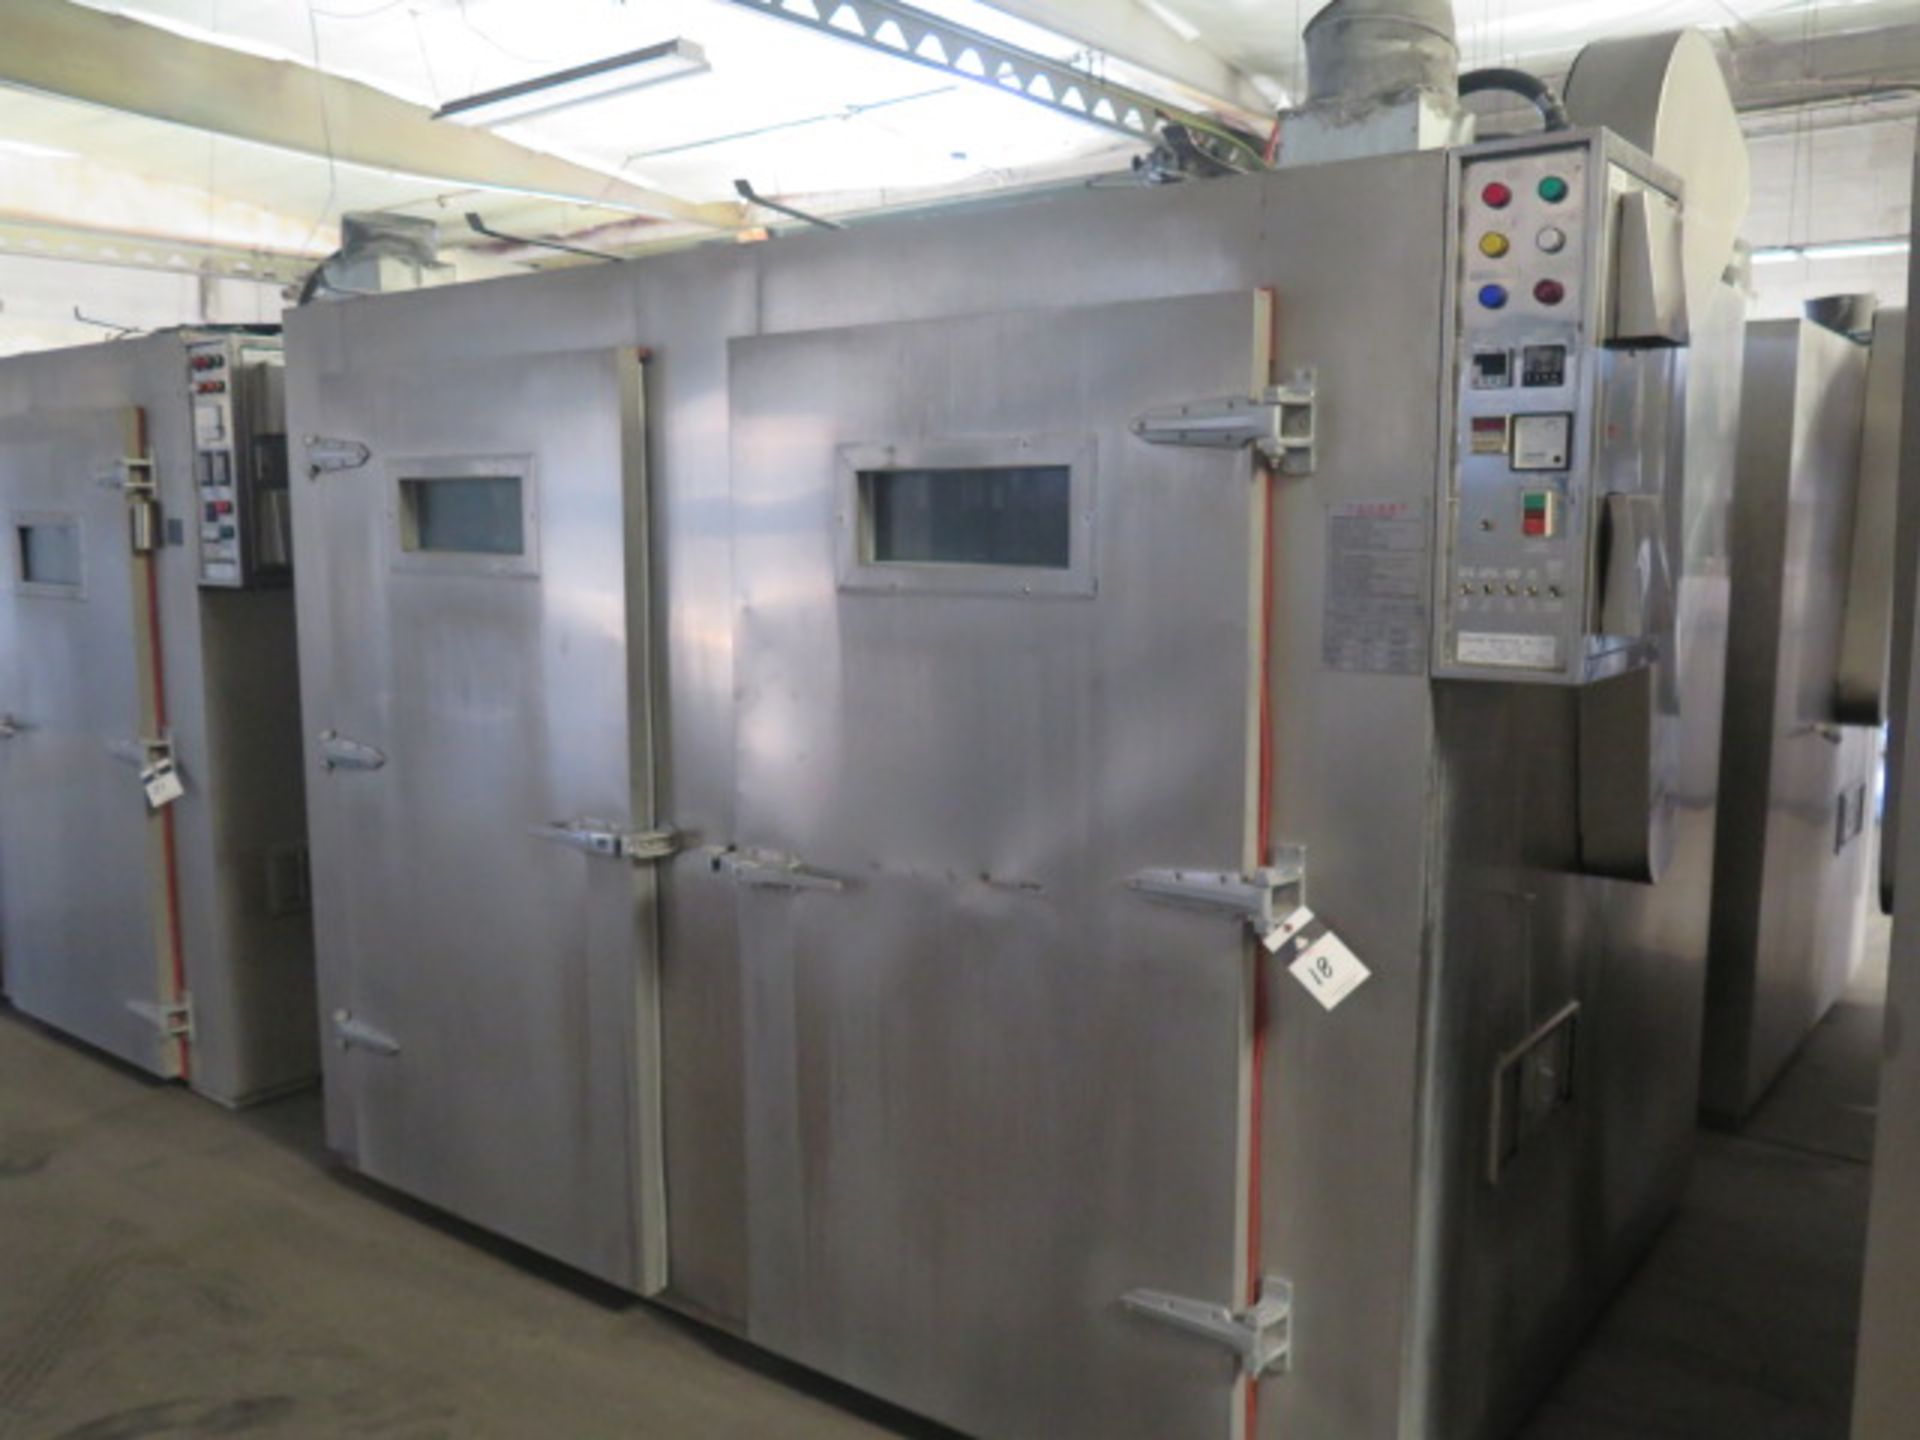 2014 Coolking Industrial mdl. Q-140 Type SY-80 2-Door Stainless Steel Industrial Oven w/ Digital - Image 2 of 11